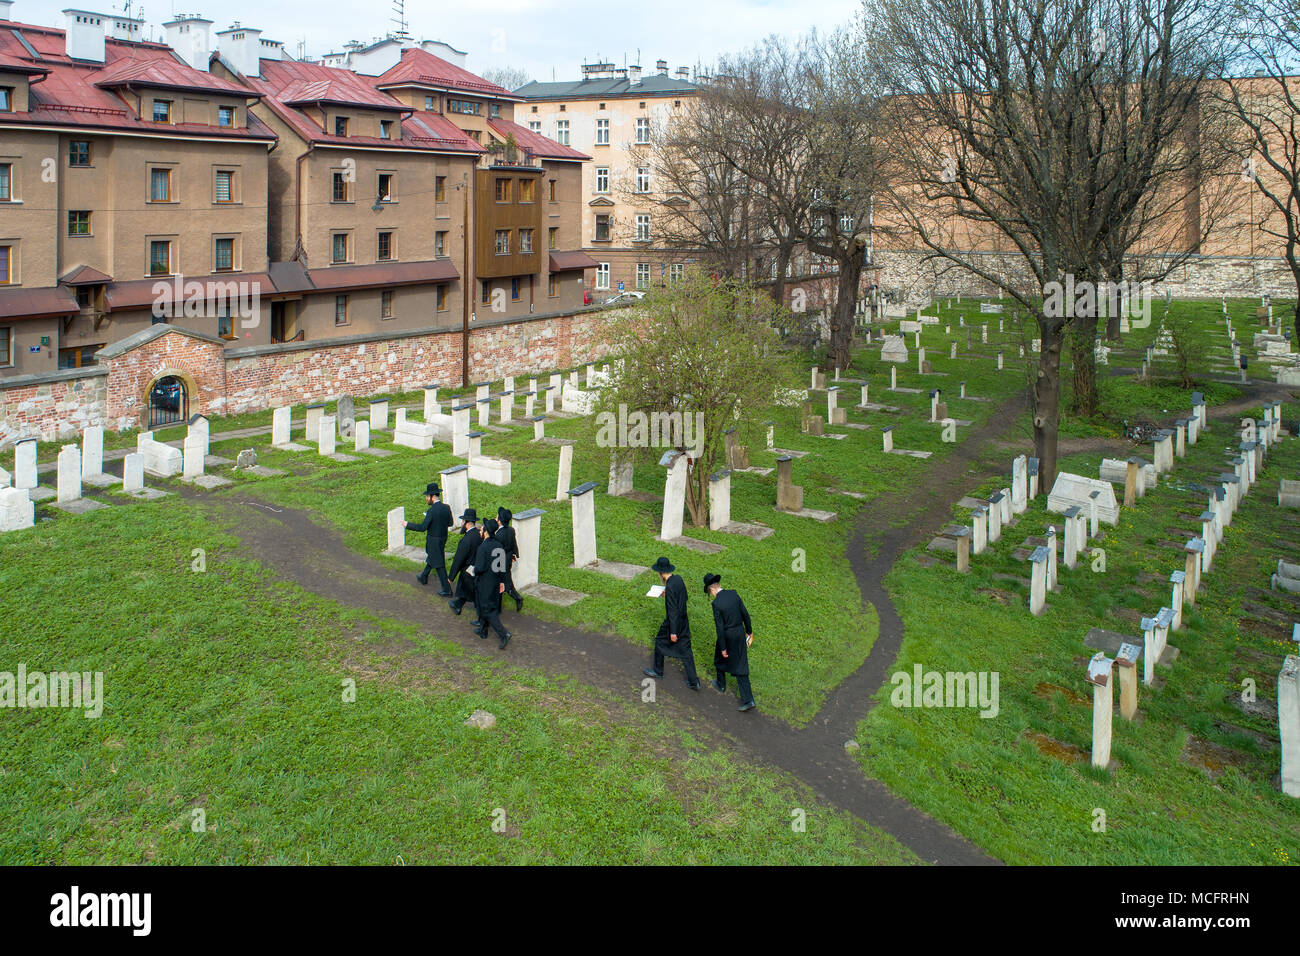 Krakow, Poland - April 11, 2018: A group of orthodox Jews in black visiting Remuh cemetery at still active Remah Synagogue in old historical Jewish Ka Stock Photo